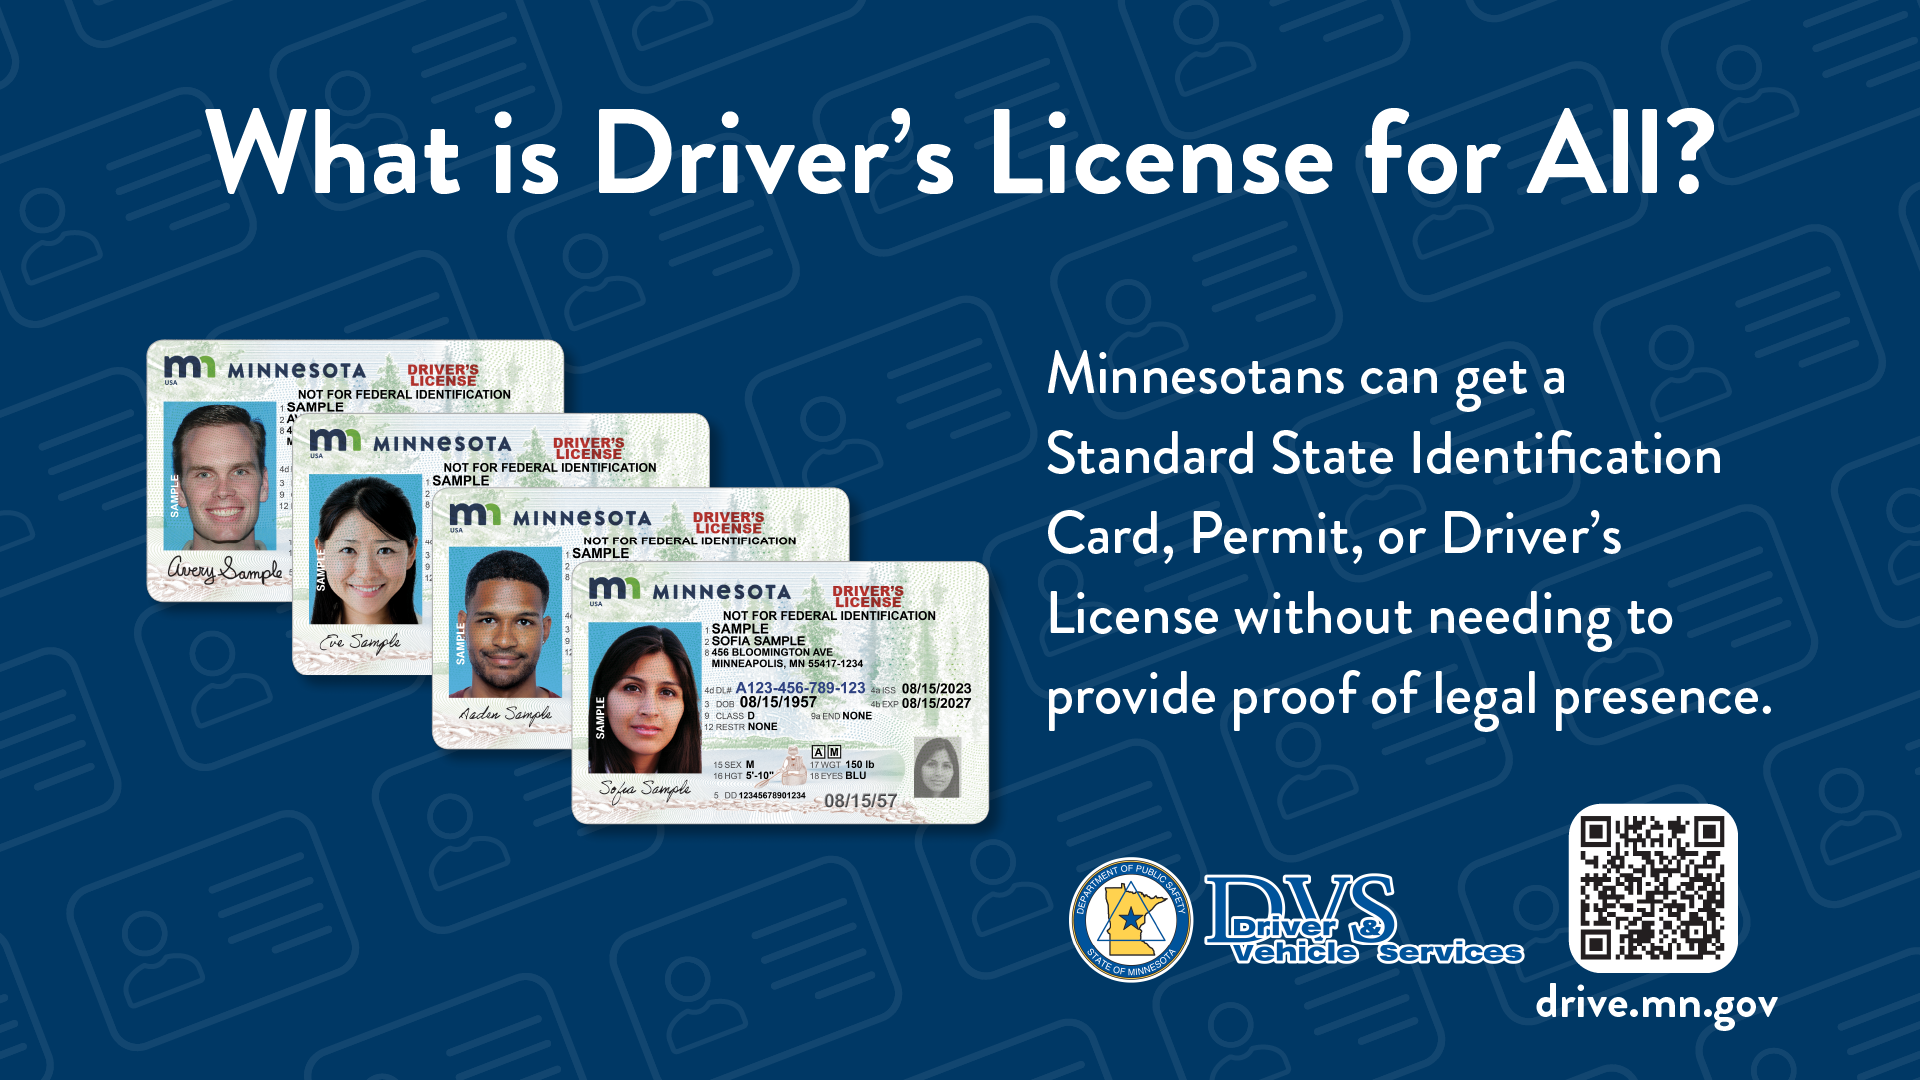 Home Page - WIDOT Driver License Guide